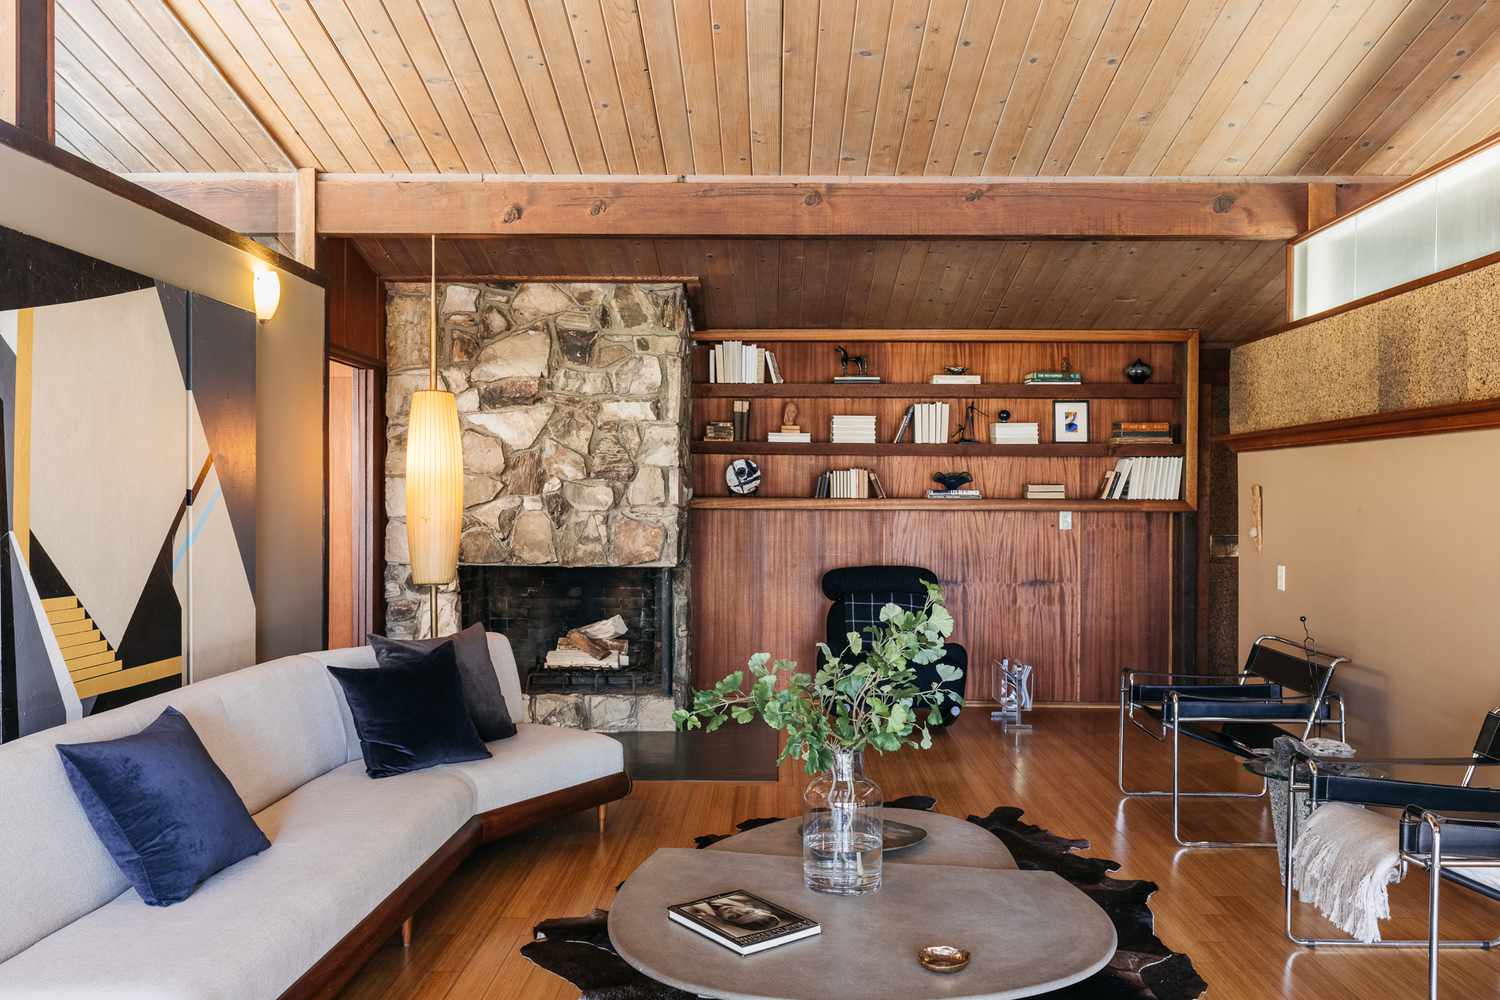 Cozy mid-century modern living room with stone fireplace.